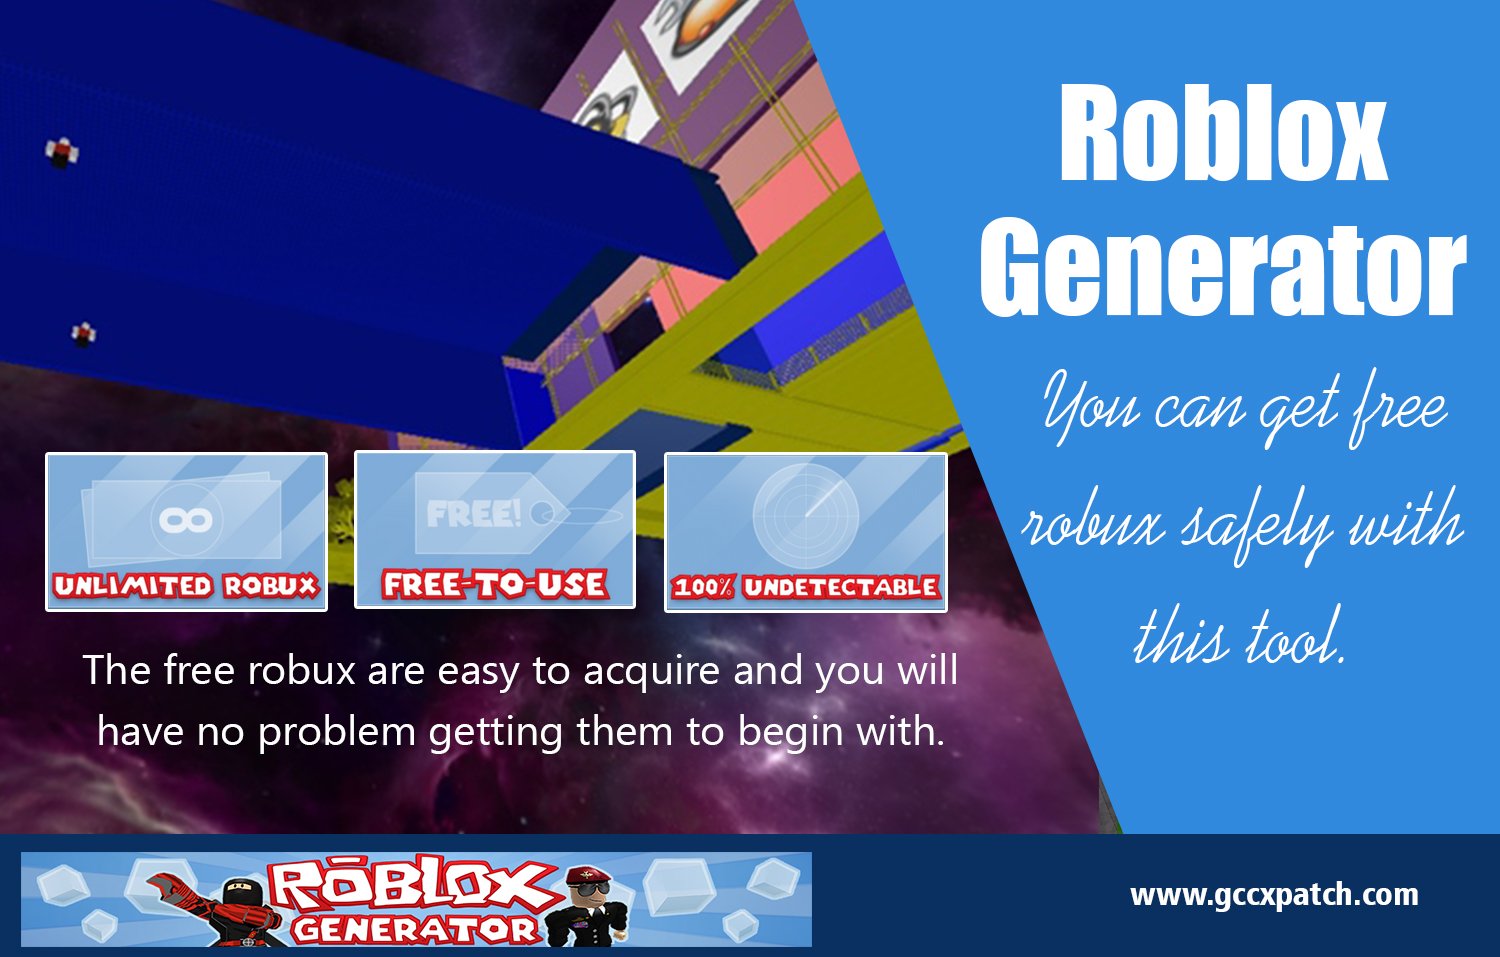 Roblox Robux Generator 2018 Updated - Get Unlimited Free Robux NO Survey